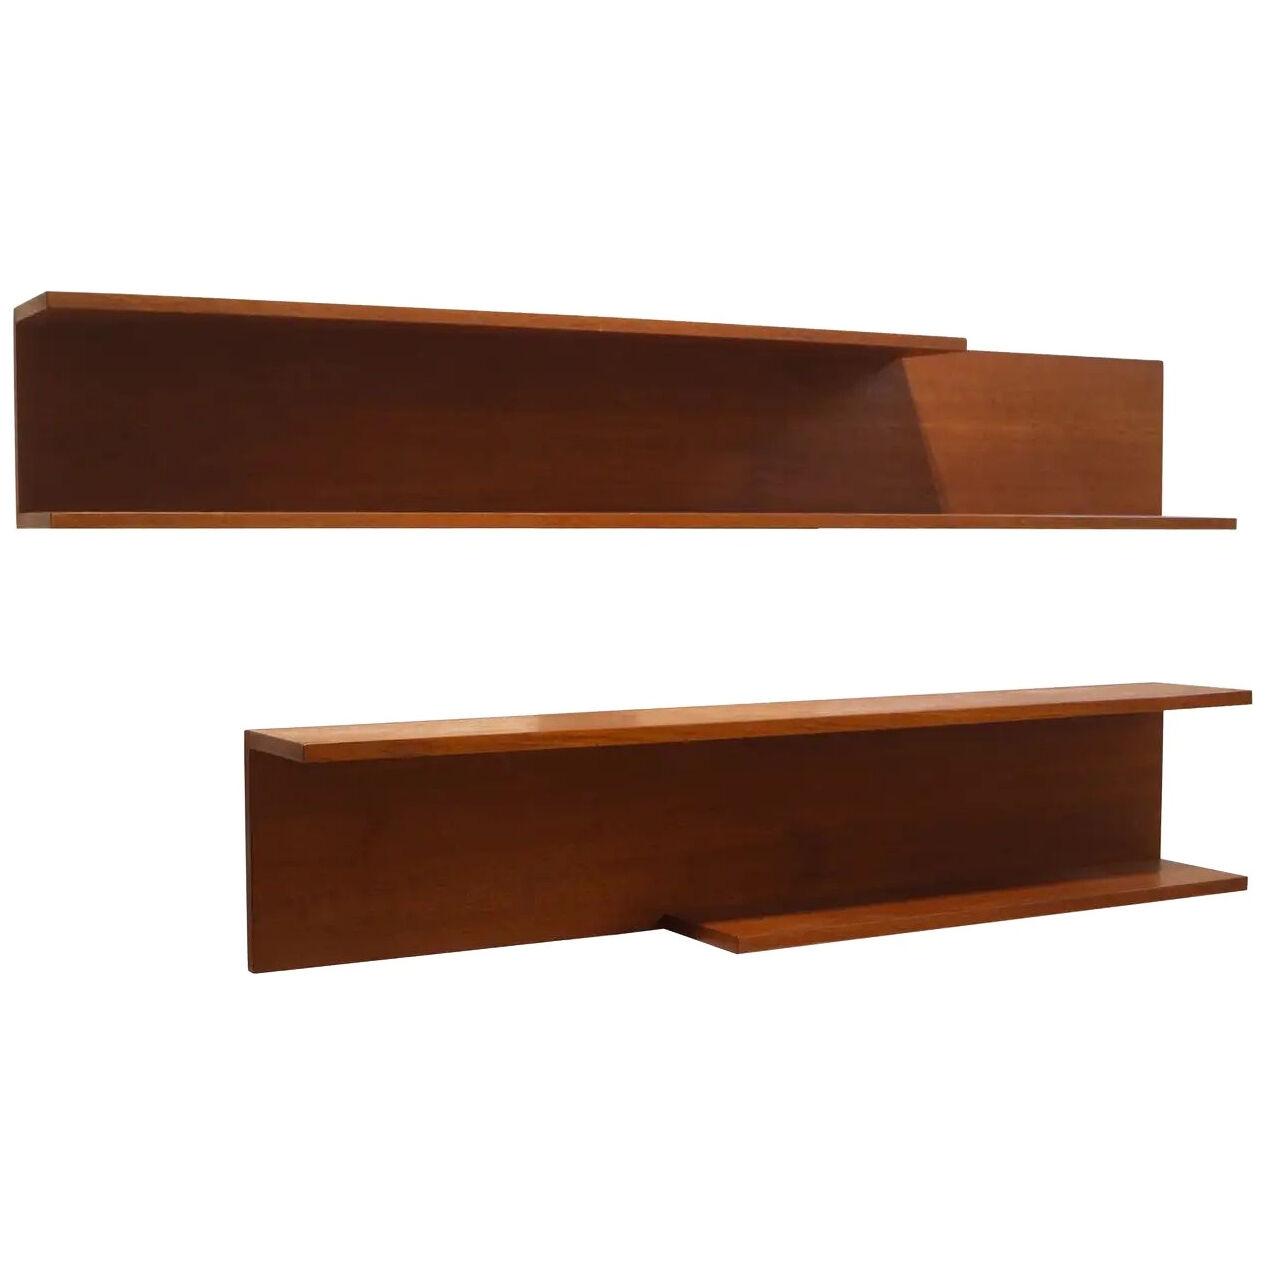 Set of 2 Shelves by Walter Wirz, 1960s